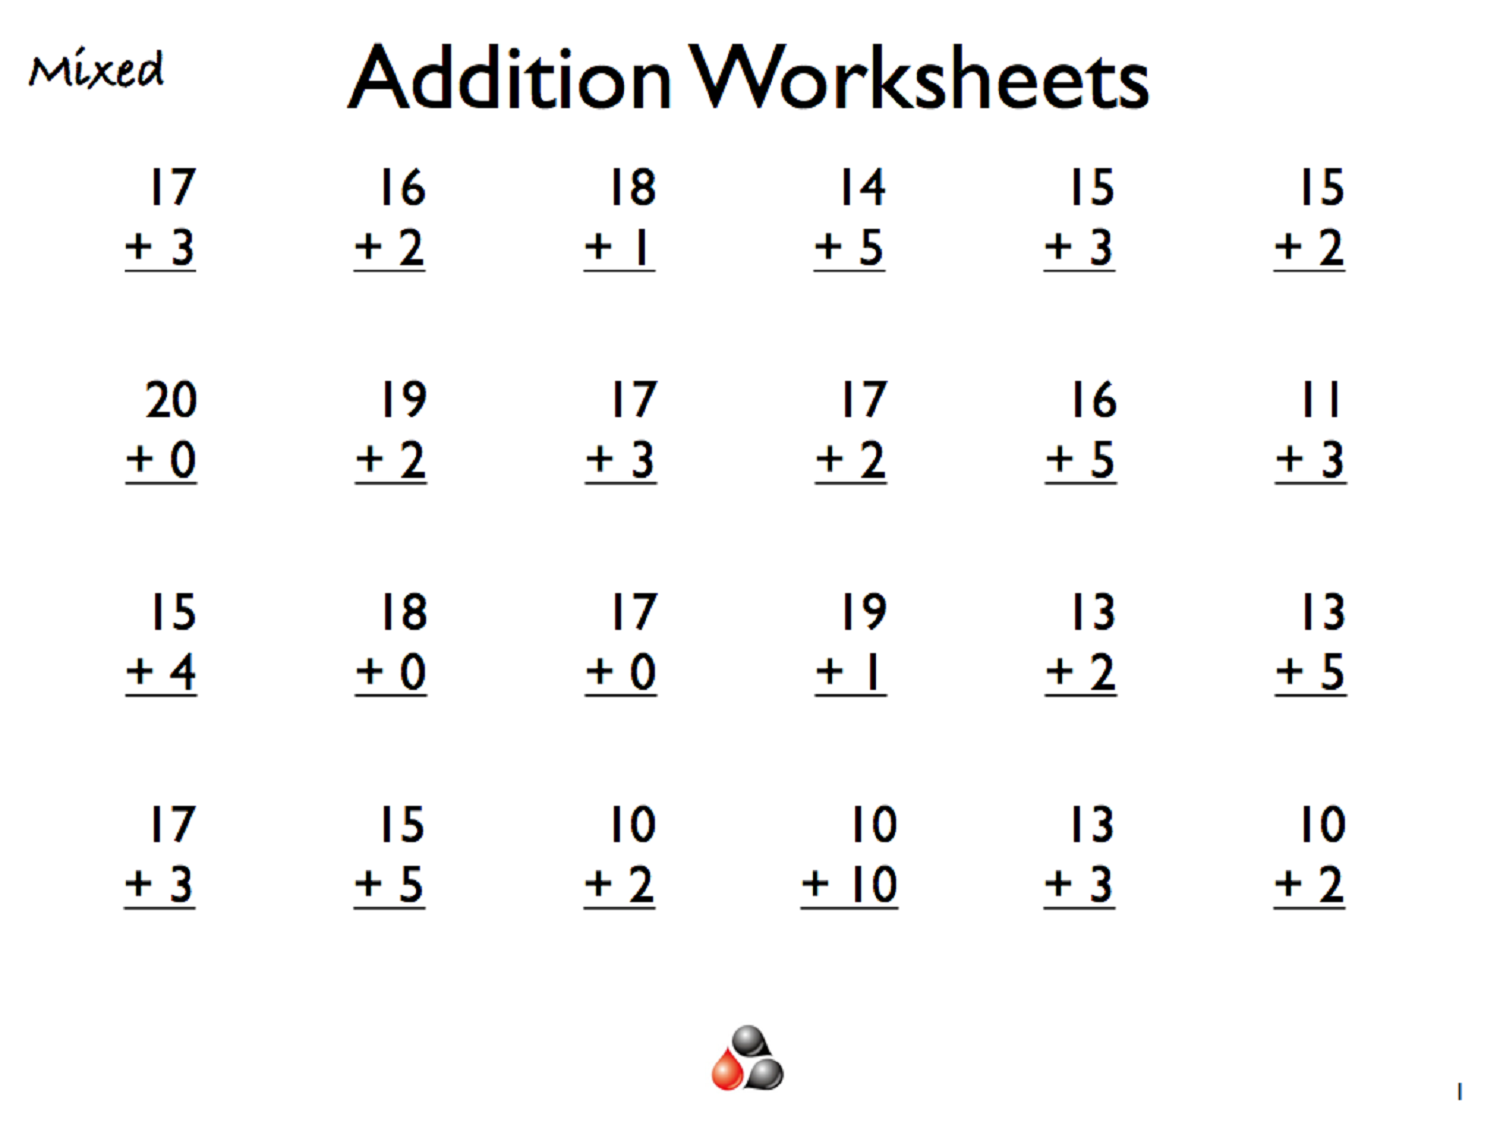 Addition For Worksheets For Grade 1 Is Helpful Educative Media